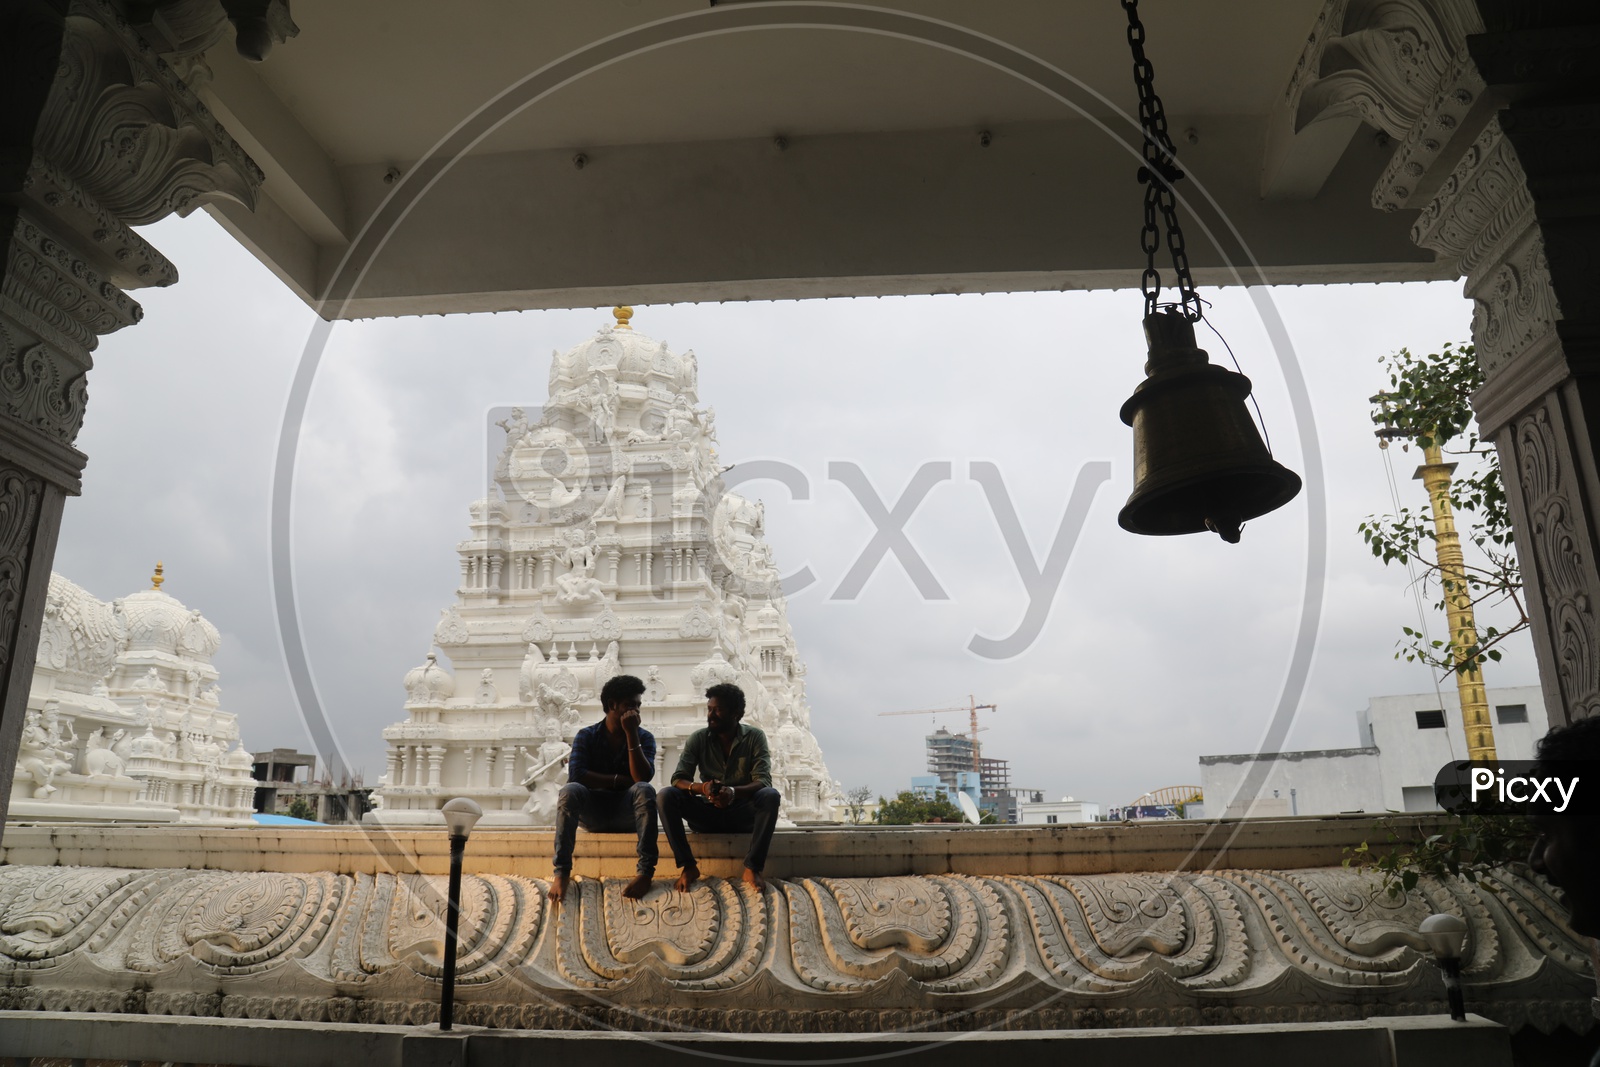 Two men having a conversation in a temple